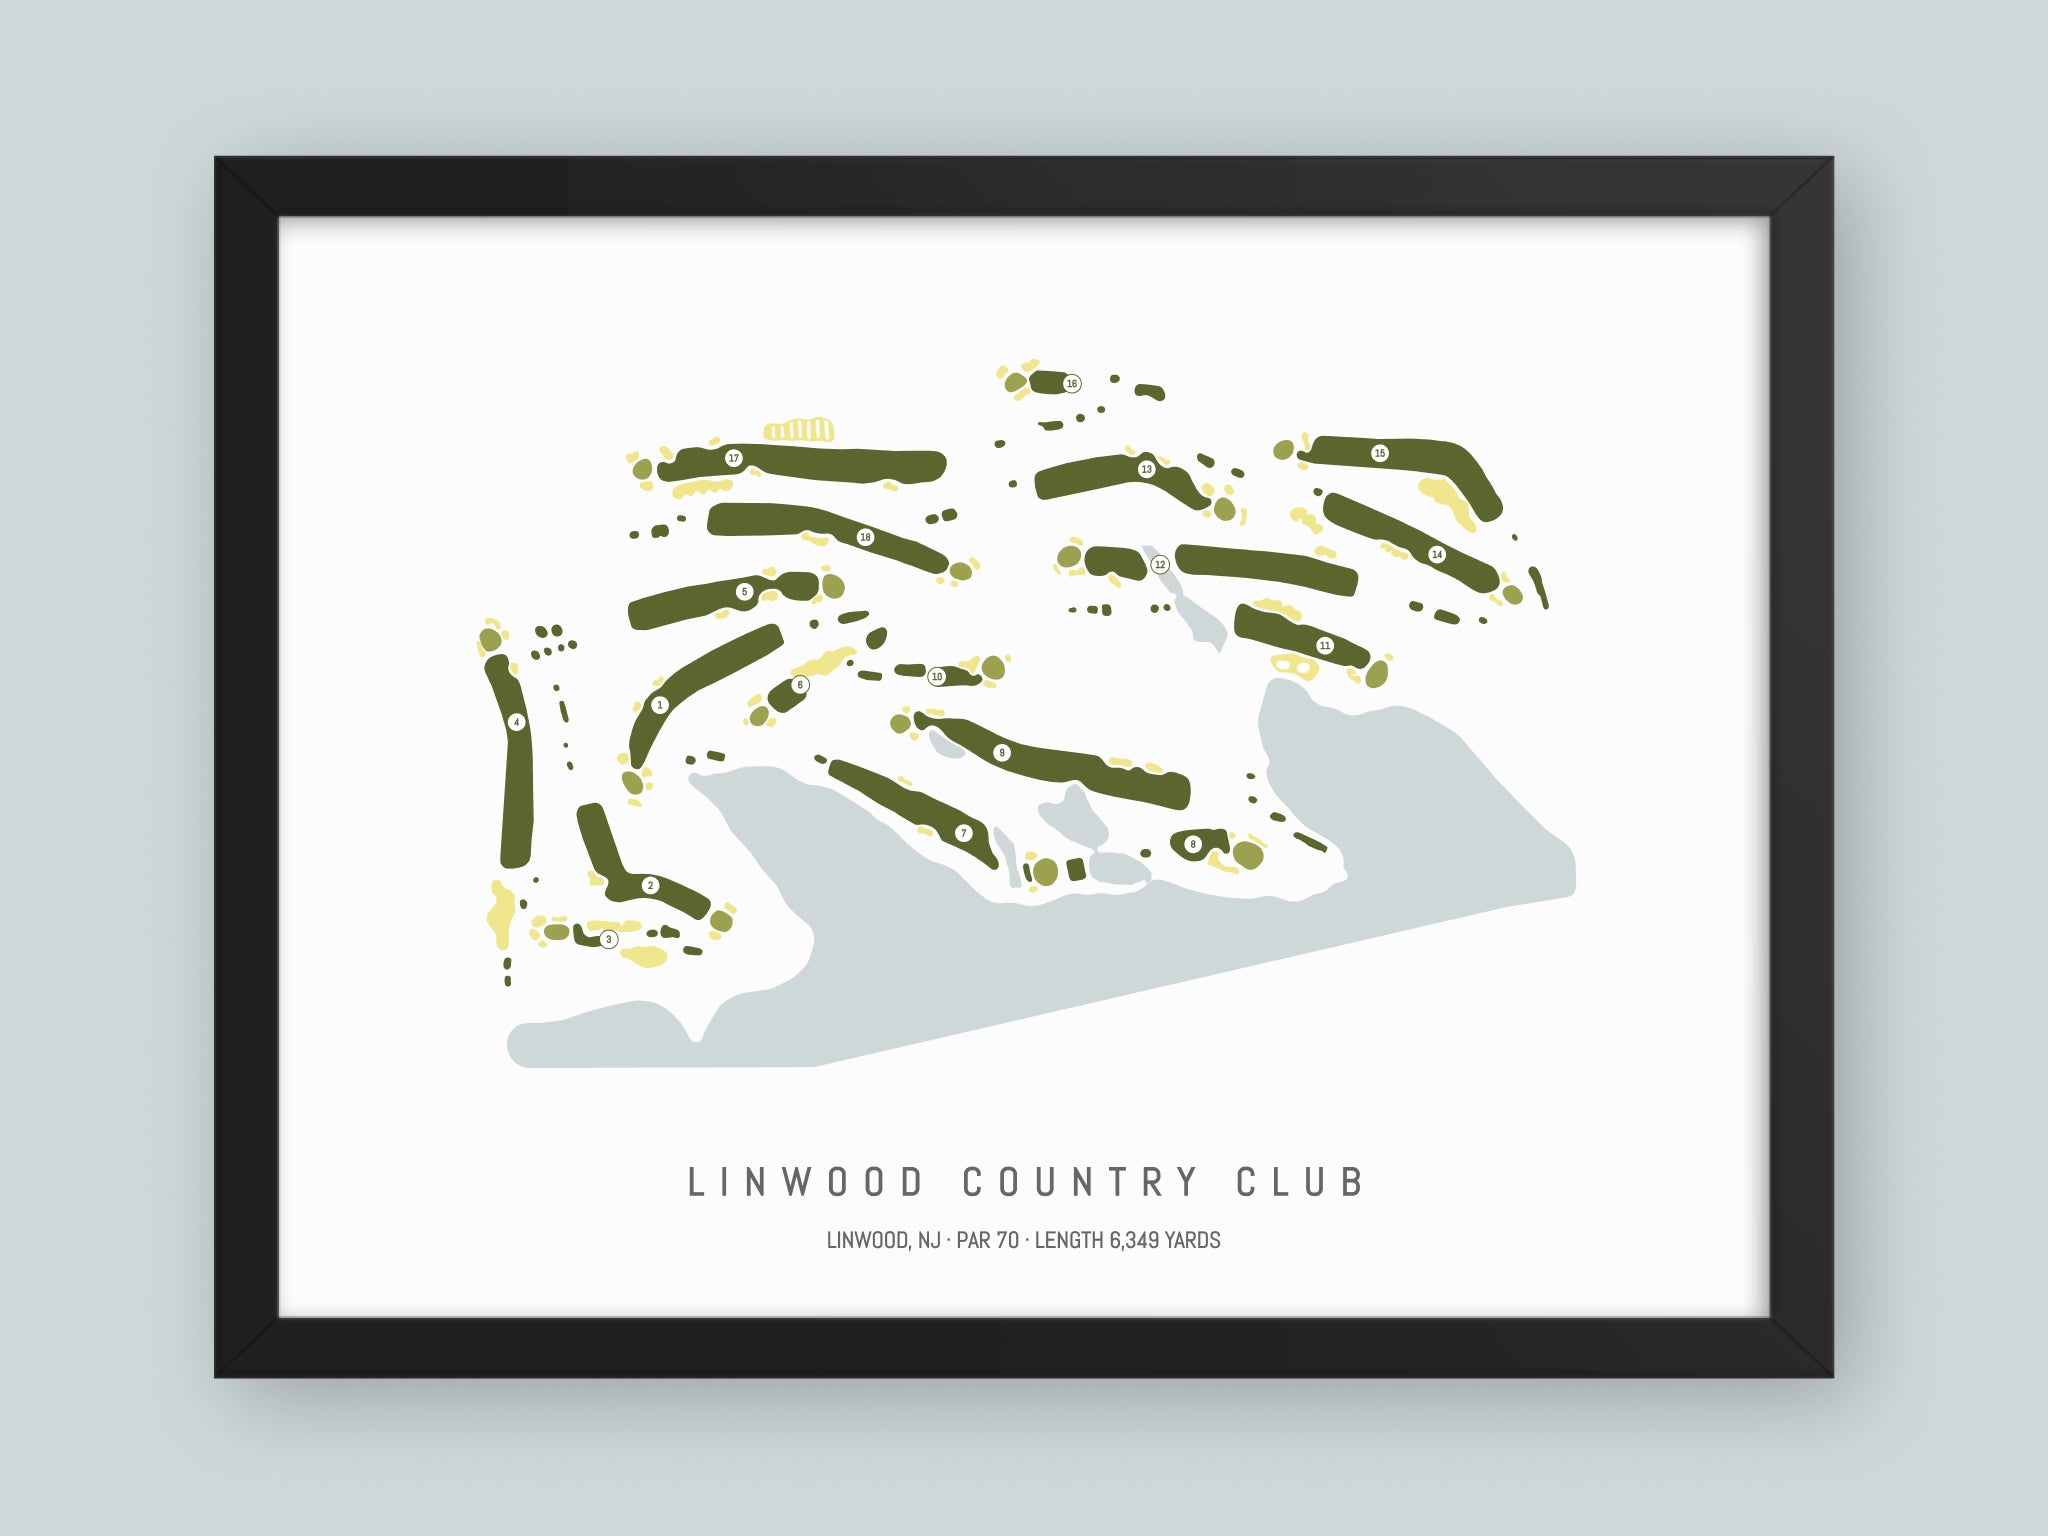 Linwood-Country-Club-NJ--Black-Frame-24x18-With-Hole-Numbers